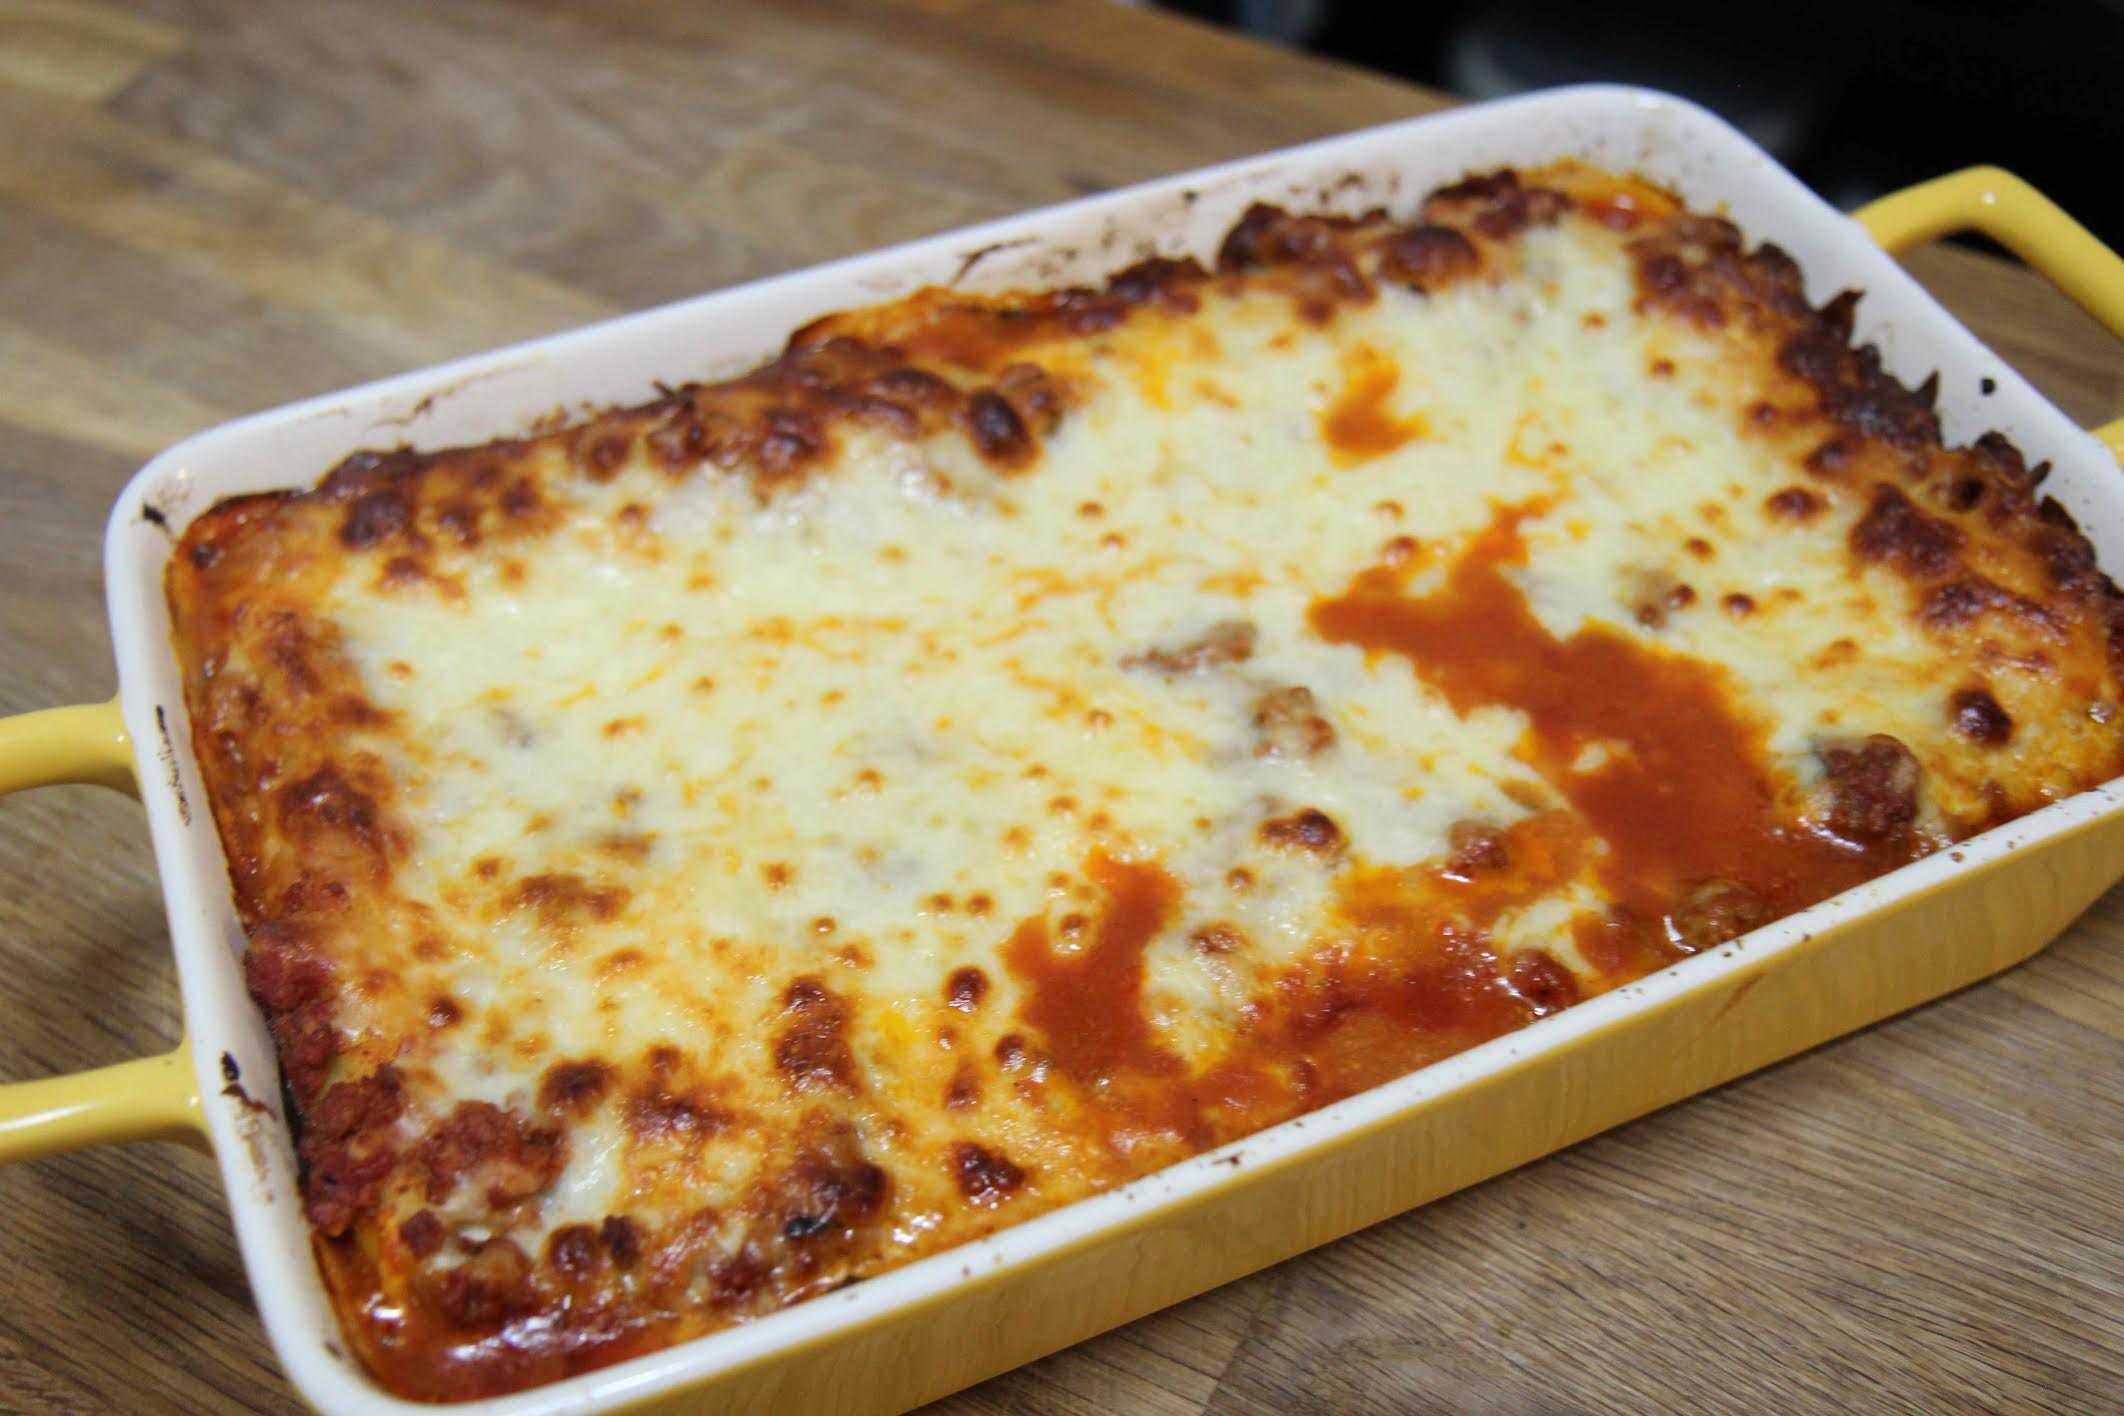 Delicious homemade Manicotti with meat sauce and cheese